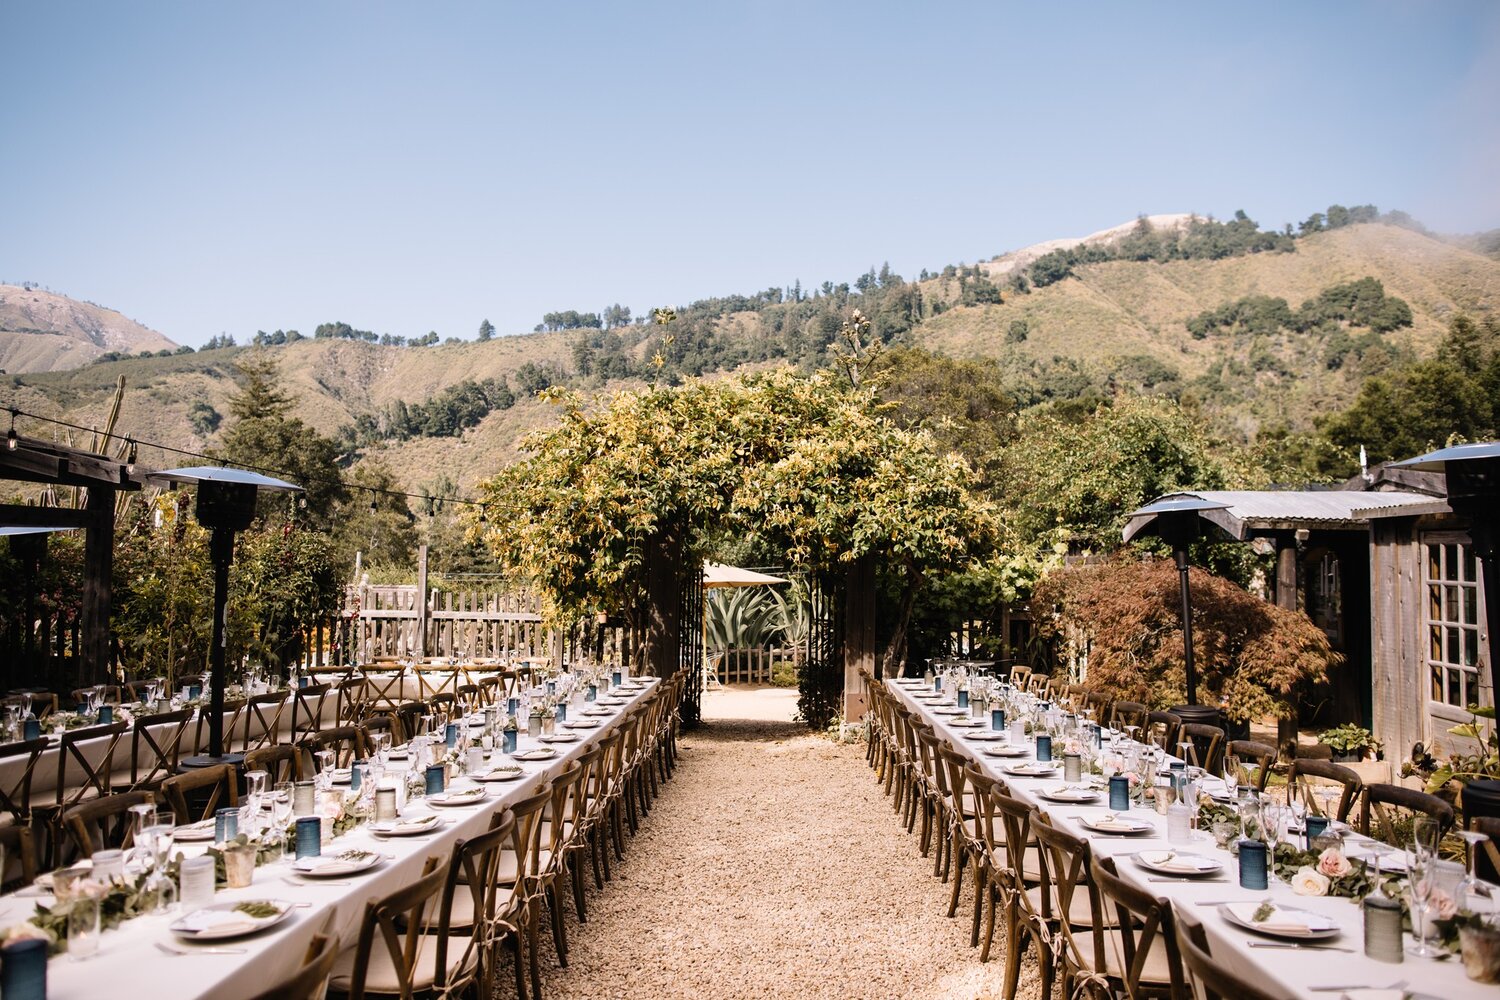 Courtyard of Loma Vista Gardens decorated by Big Sur florist for a large wedding reception with long tables lined with flower vases